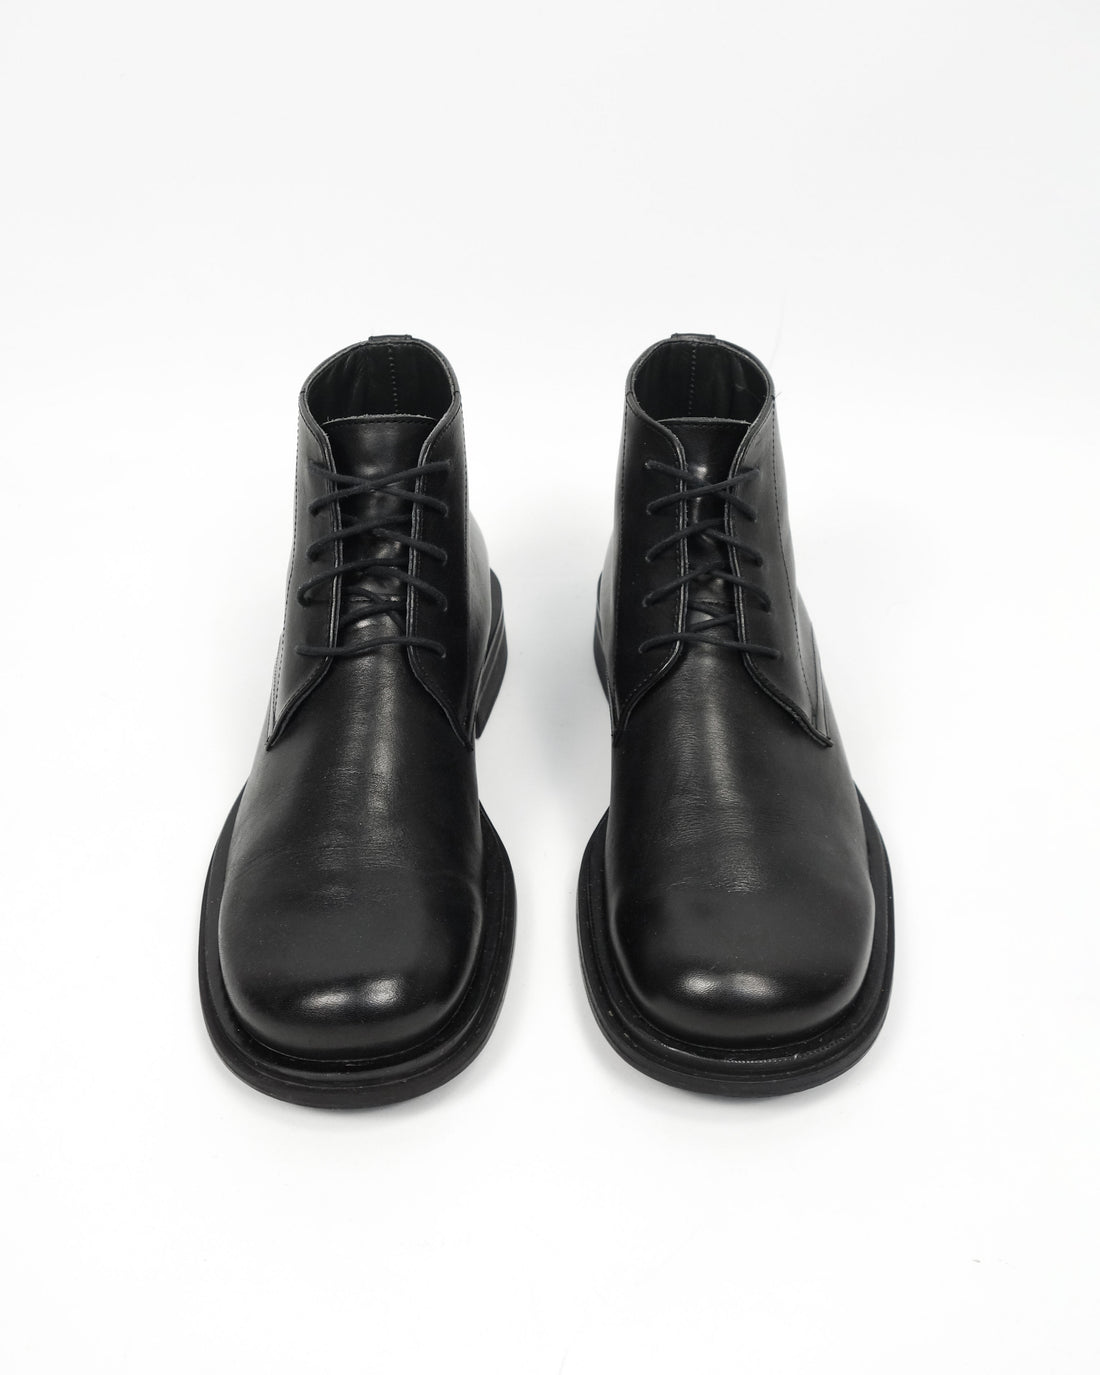 Kenzo Homme "Sky Walk" Black Leather Shoes 1990's